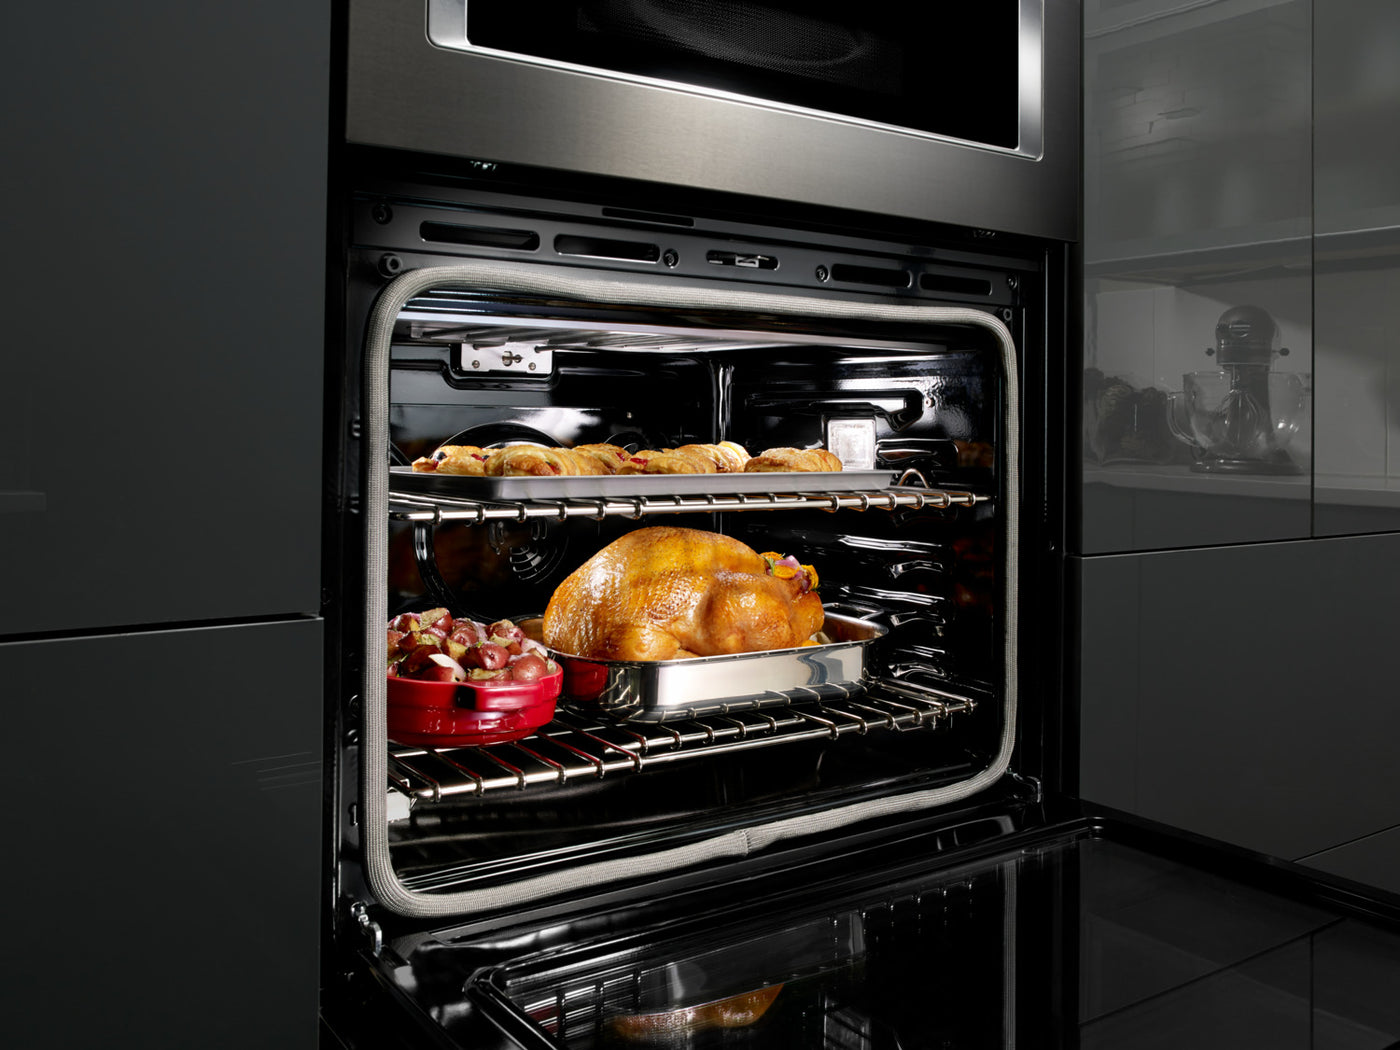 KitchenAid Black Stainless Steel Wall Oven (5.0 Cu. Ft.) w/ Microwave ...